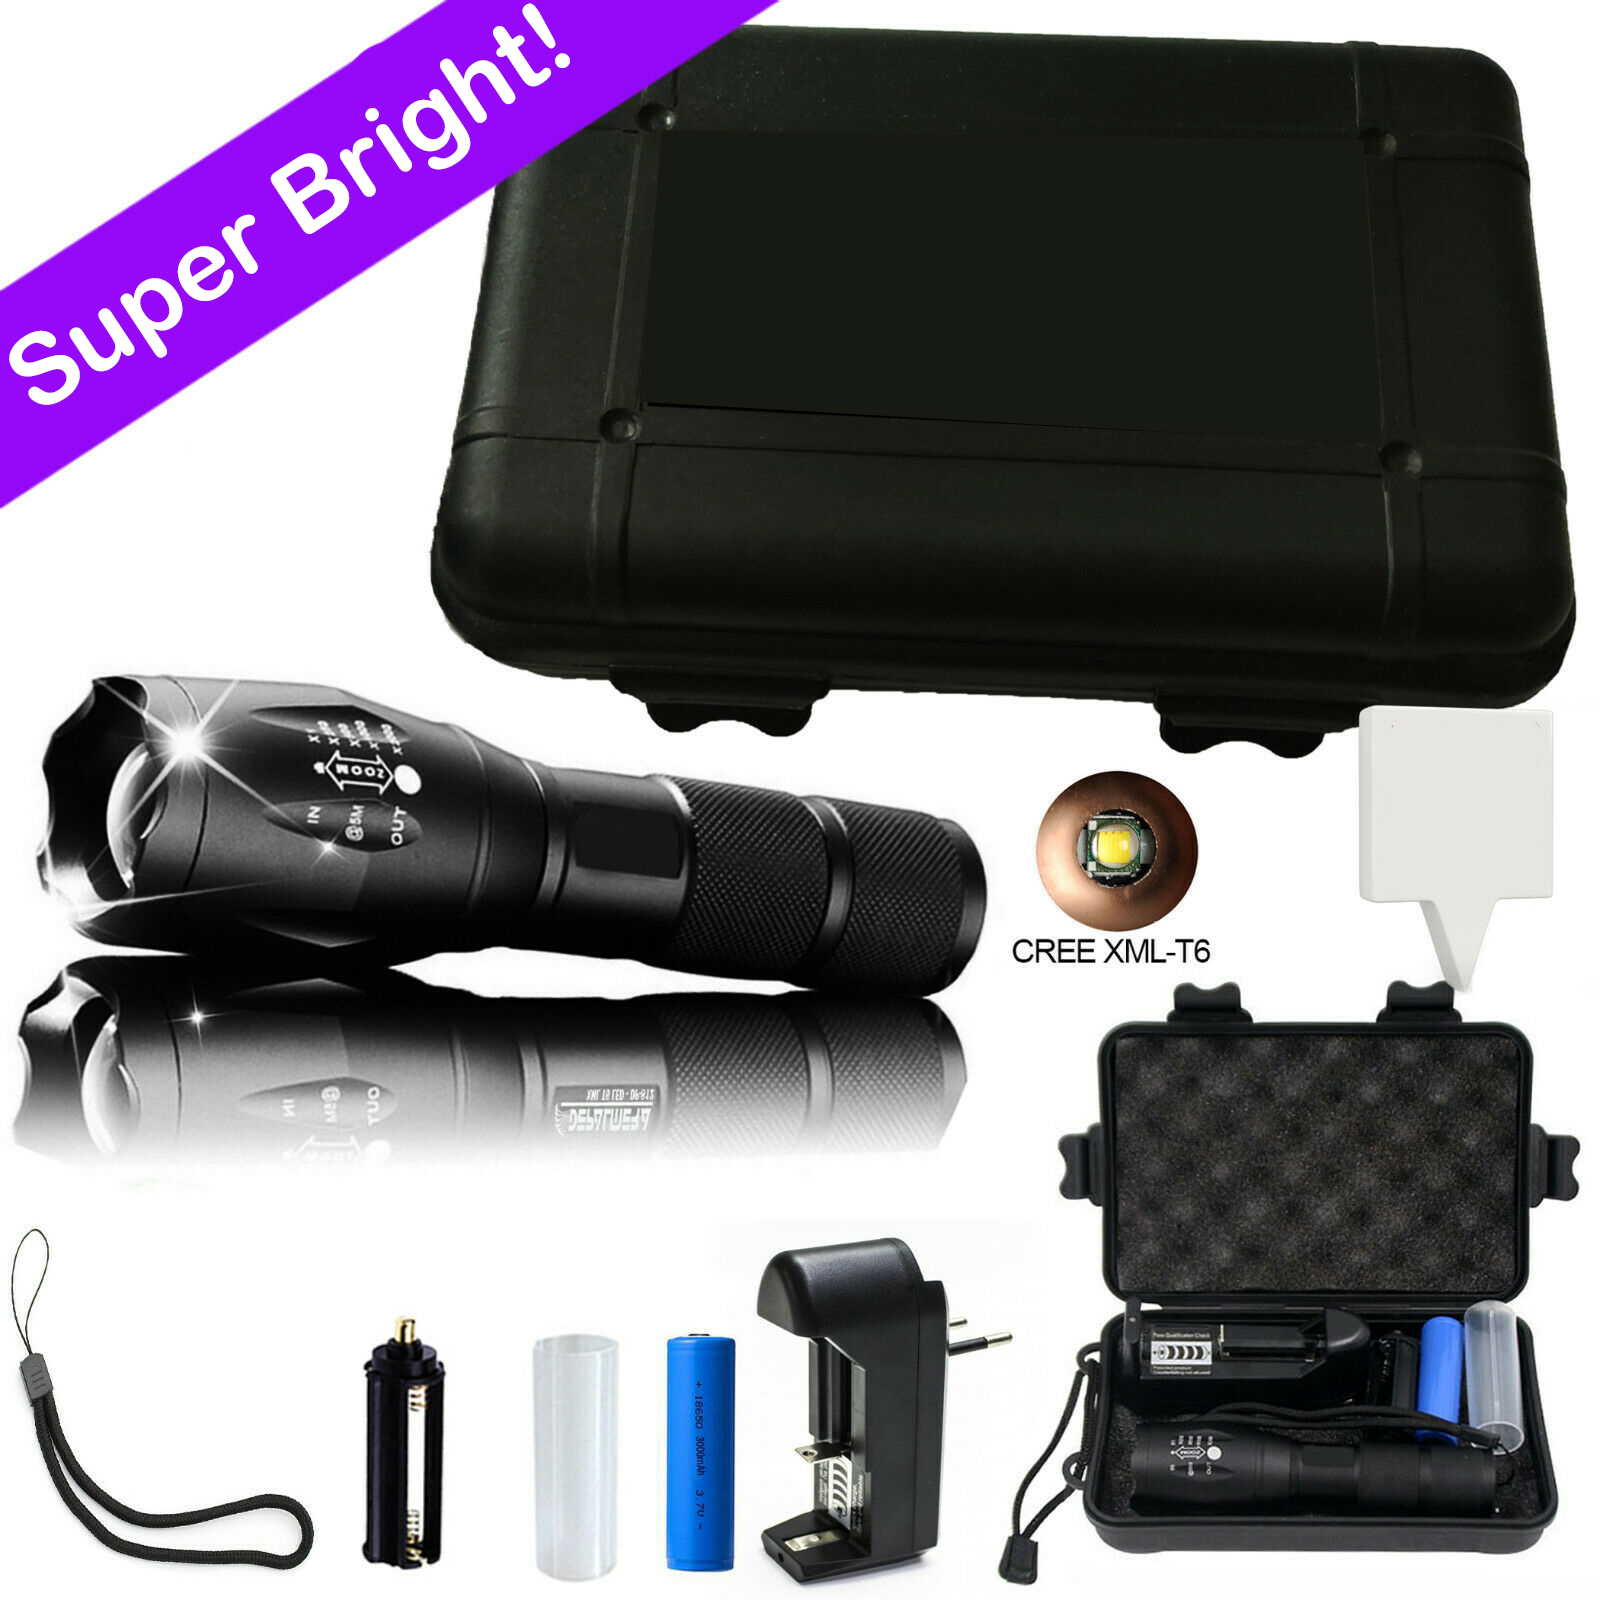 Portable T6 Tactical LED Flashlight 980000LM Zoomable 5-Mode Battery Outdoor Tools Black 18650